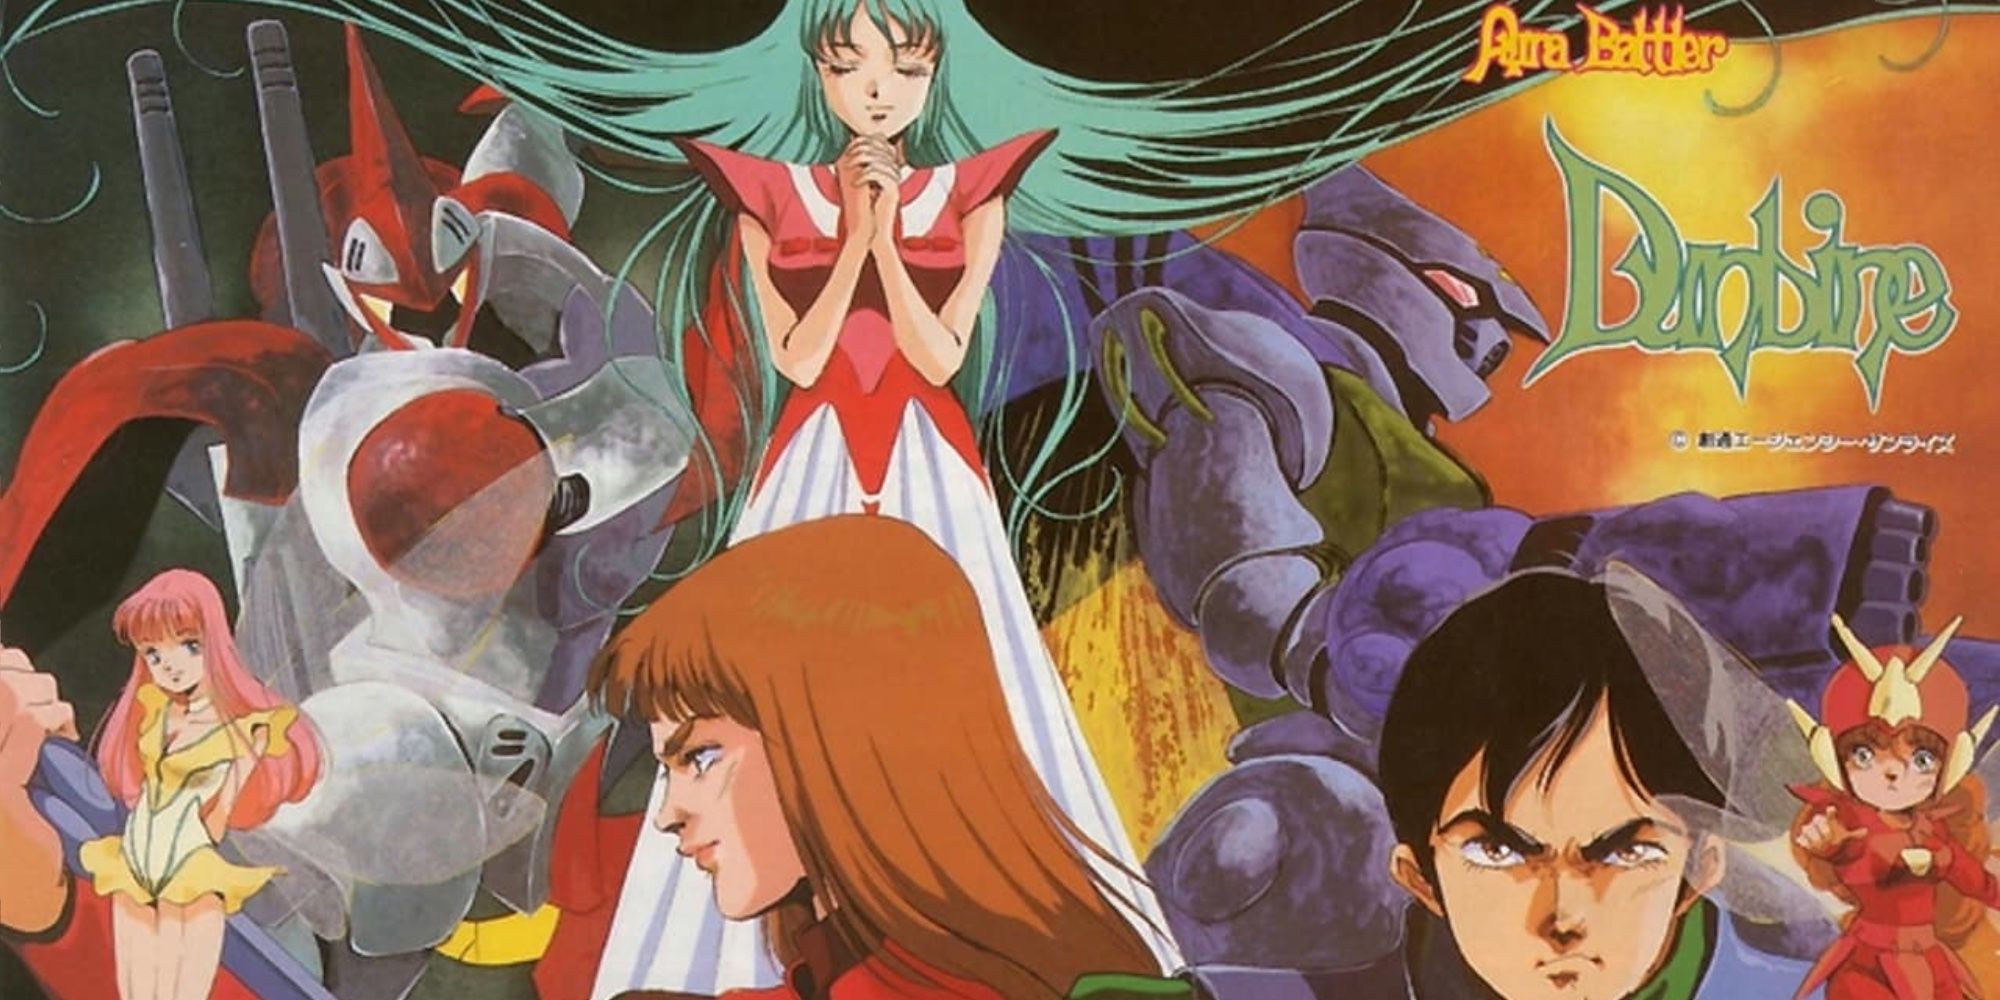 Aura Battler Dunbine, cover photo of the anime showcasing all the main protagonists and their mecha